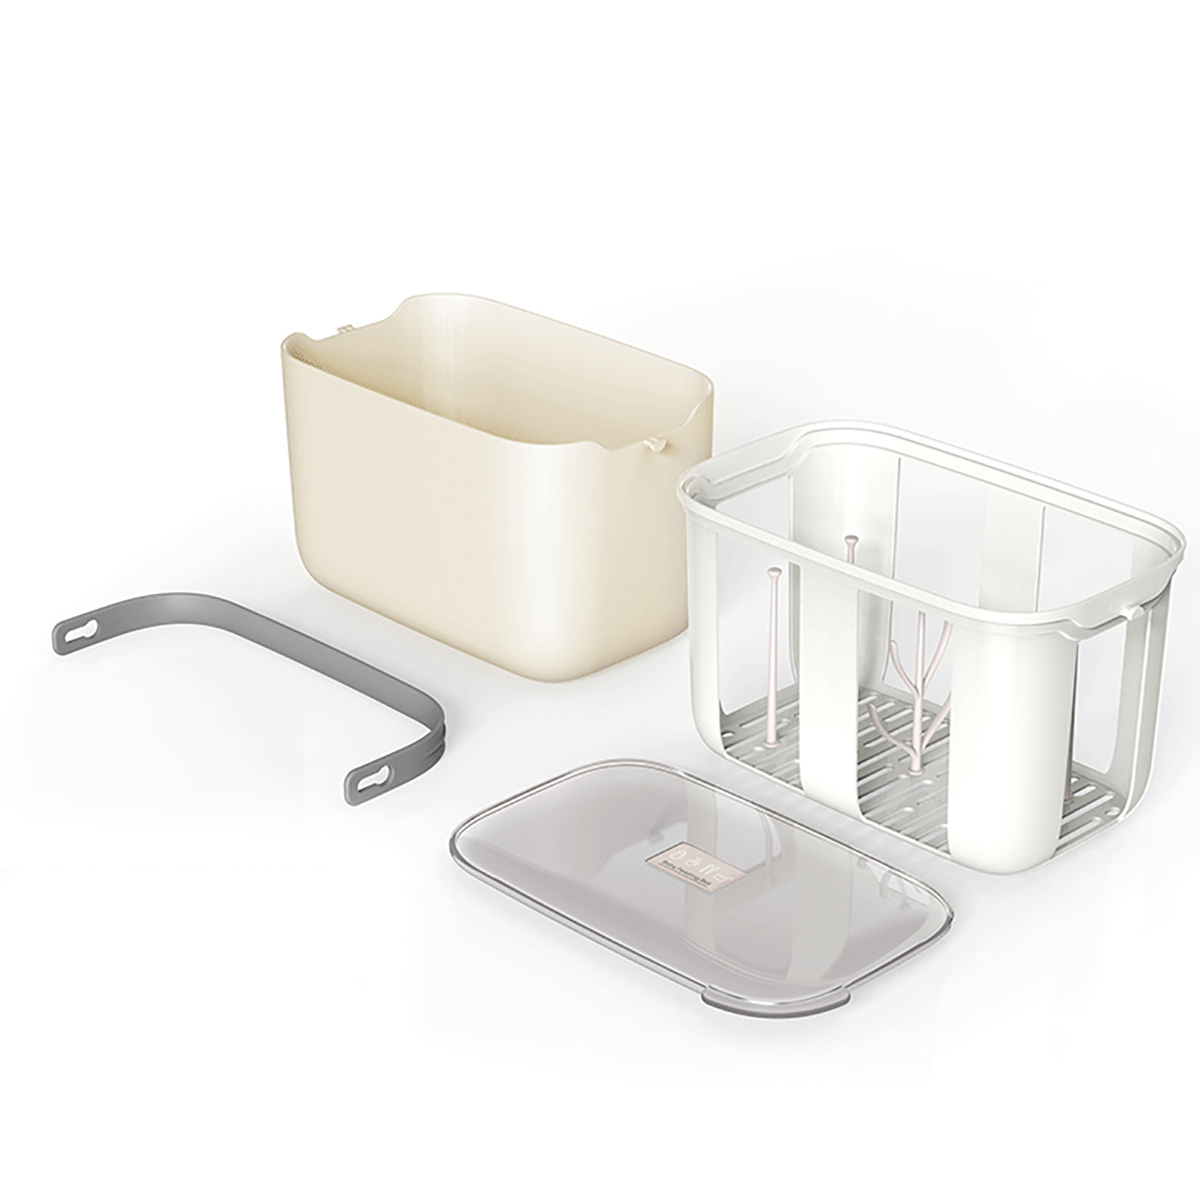 Portable-Baby-Bottle-Storage-Box-With-Handle-And-Drying-Rack-Flap-Dustproof-Baby-Tableware-Storage-B-1566522-7